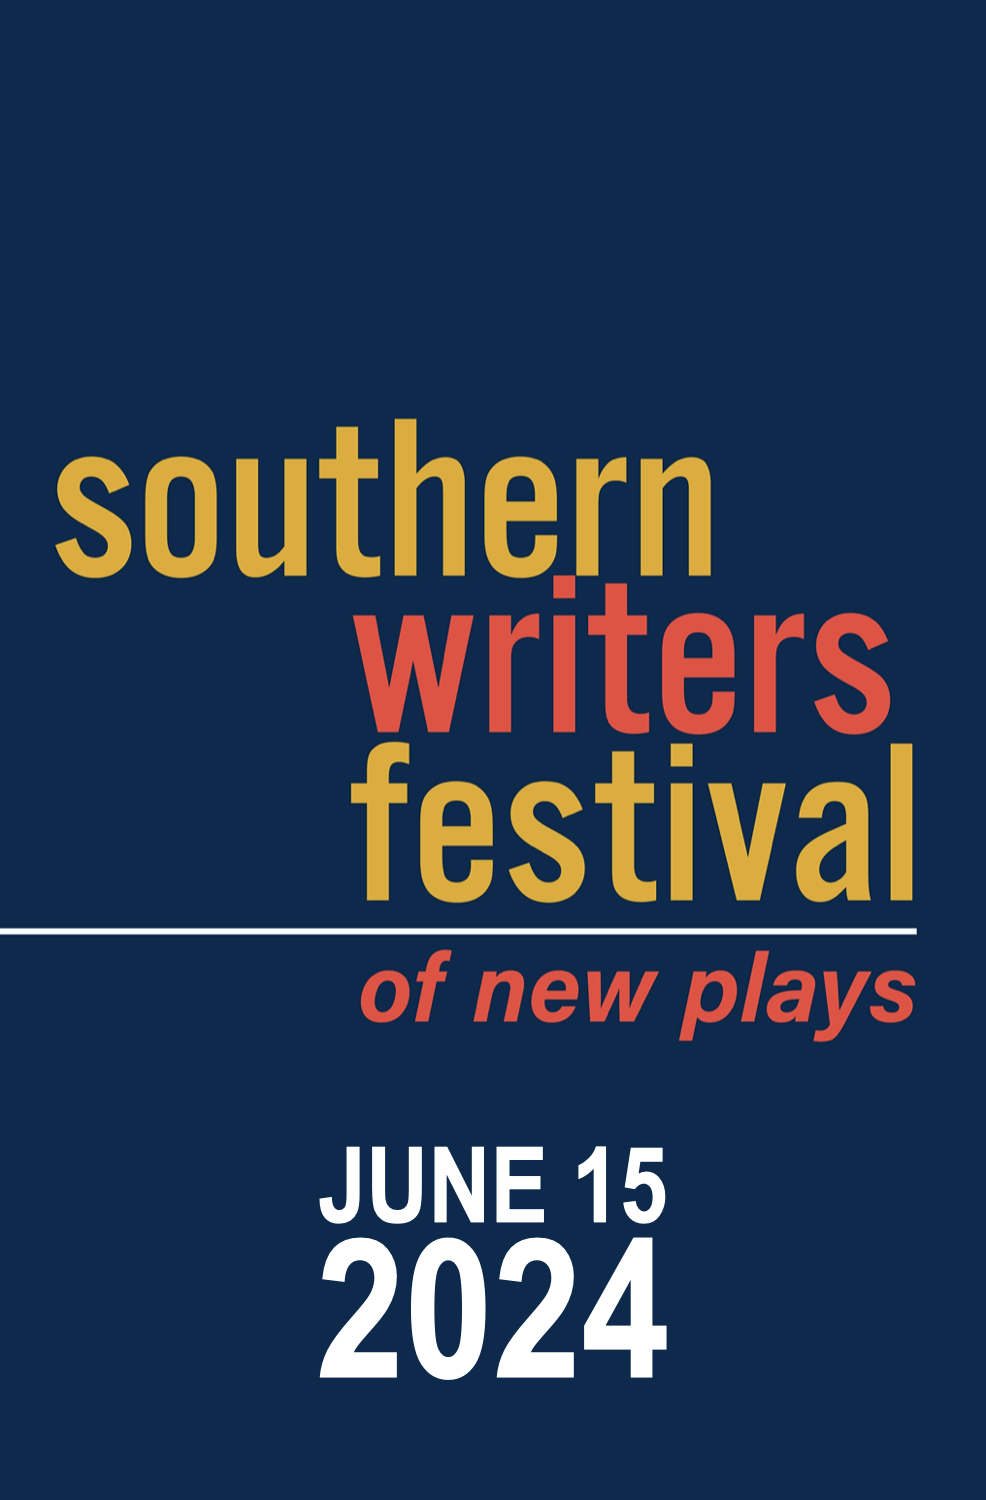 Southern Writers Festival of New Plays title graphic - date June 15, 2024